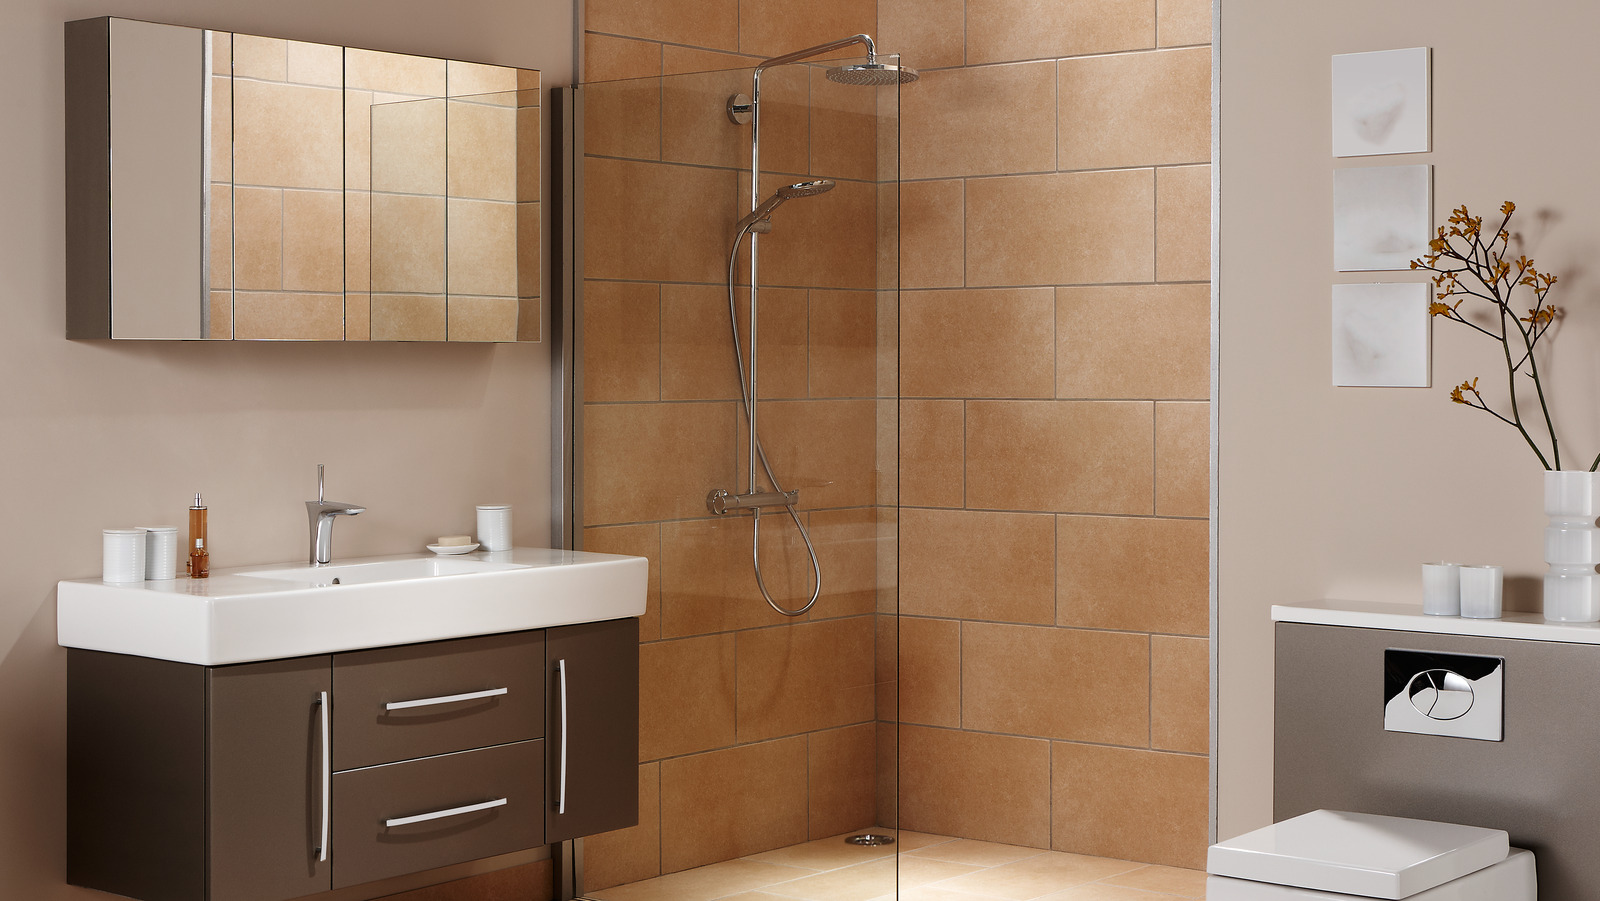 How Long Should You Wait To Use Your Shower After Grouting Tiles? – House Digest